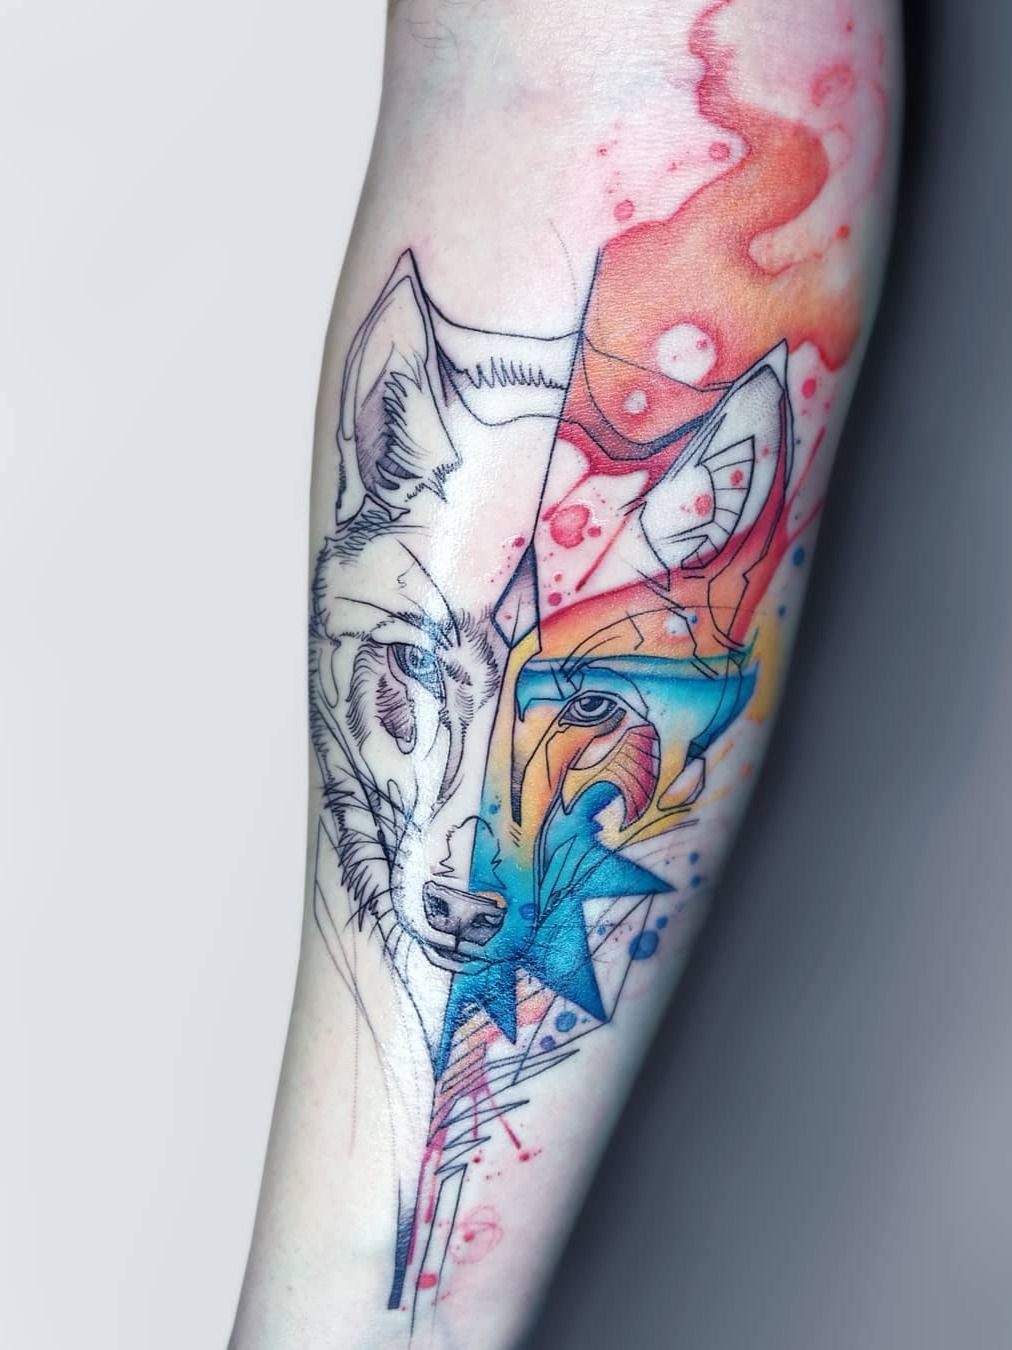 Seattle Watercolor Tattoo Artists, Art - , , - 5,190 Followers, 1,687 Posts  - See Instagram photos and videos from Fist Full Of Metal Tattoo  (@ffom_tattoo).